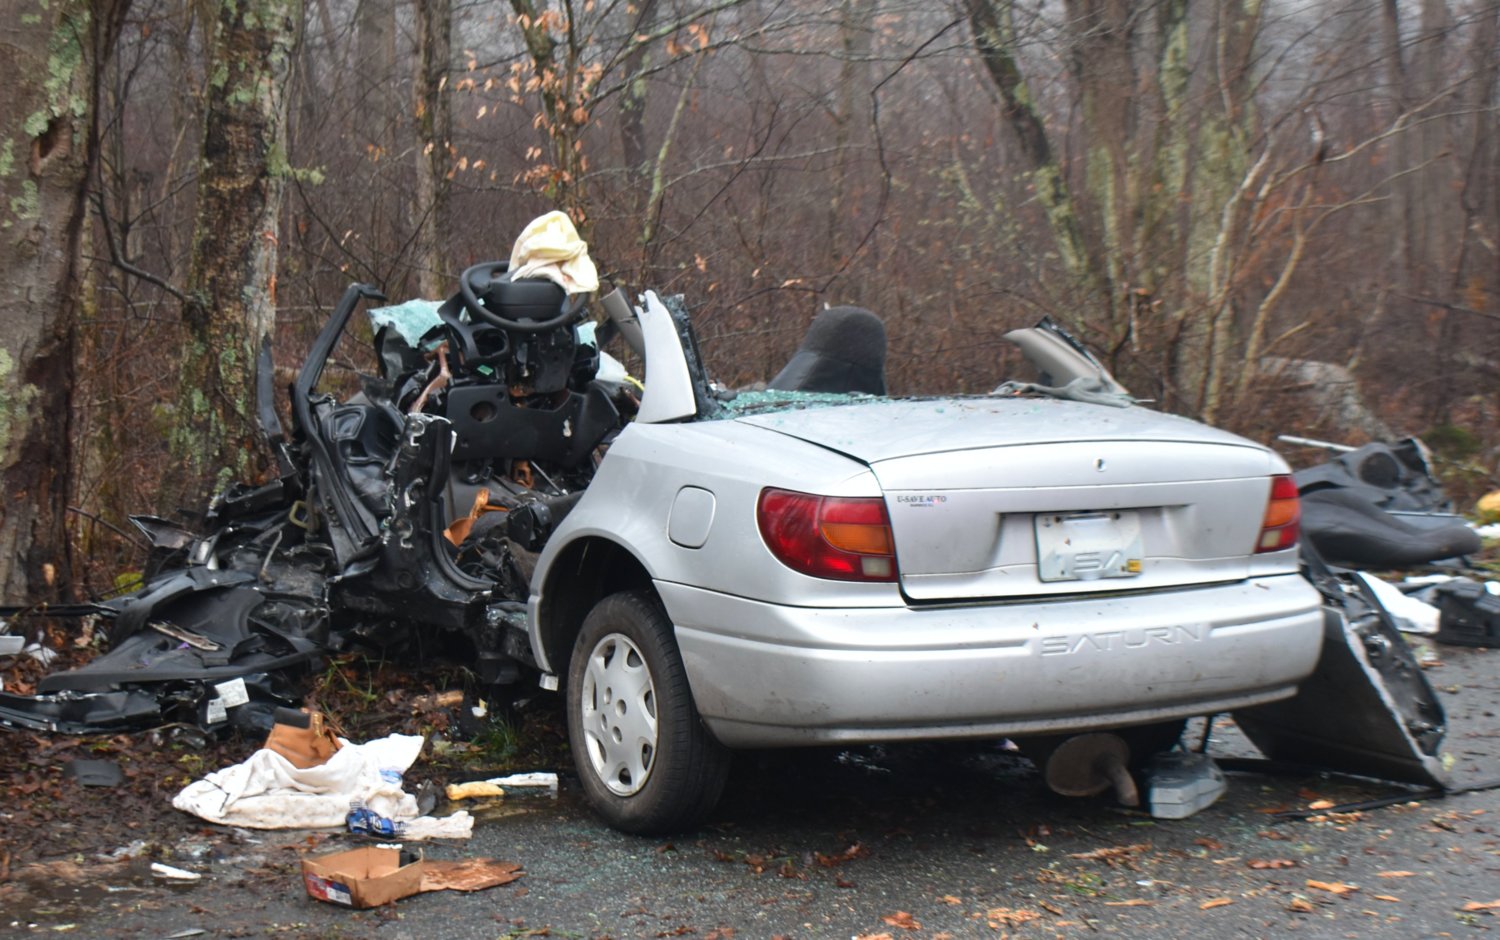 Fire and rescue crews had to cut into John Barretto's Saturn to free him following Friday morning's accident.